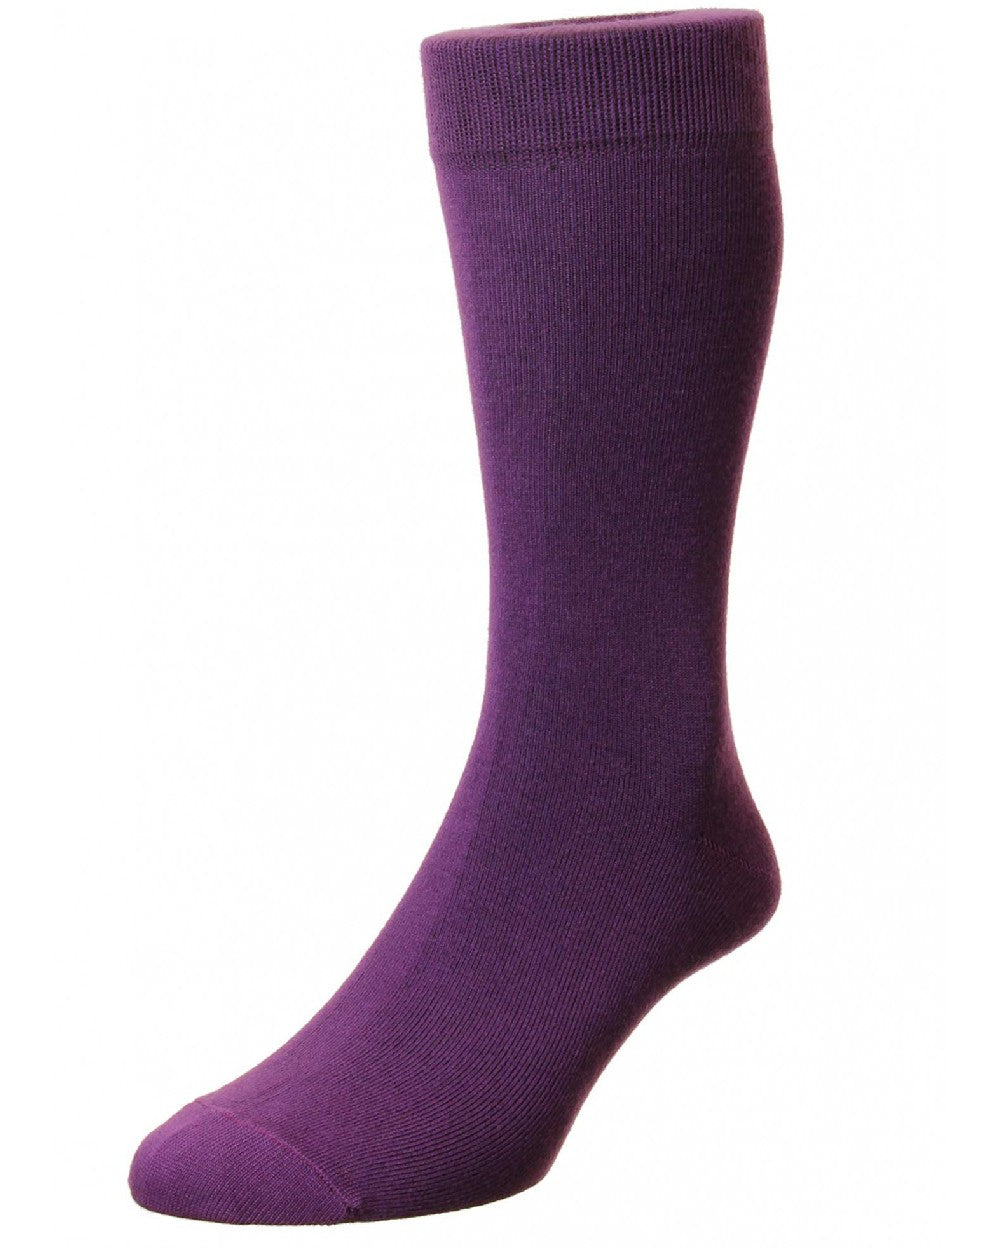 HJ Hall Allerton Supersoft Bamboo in Plum 